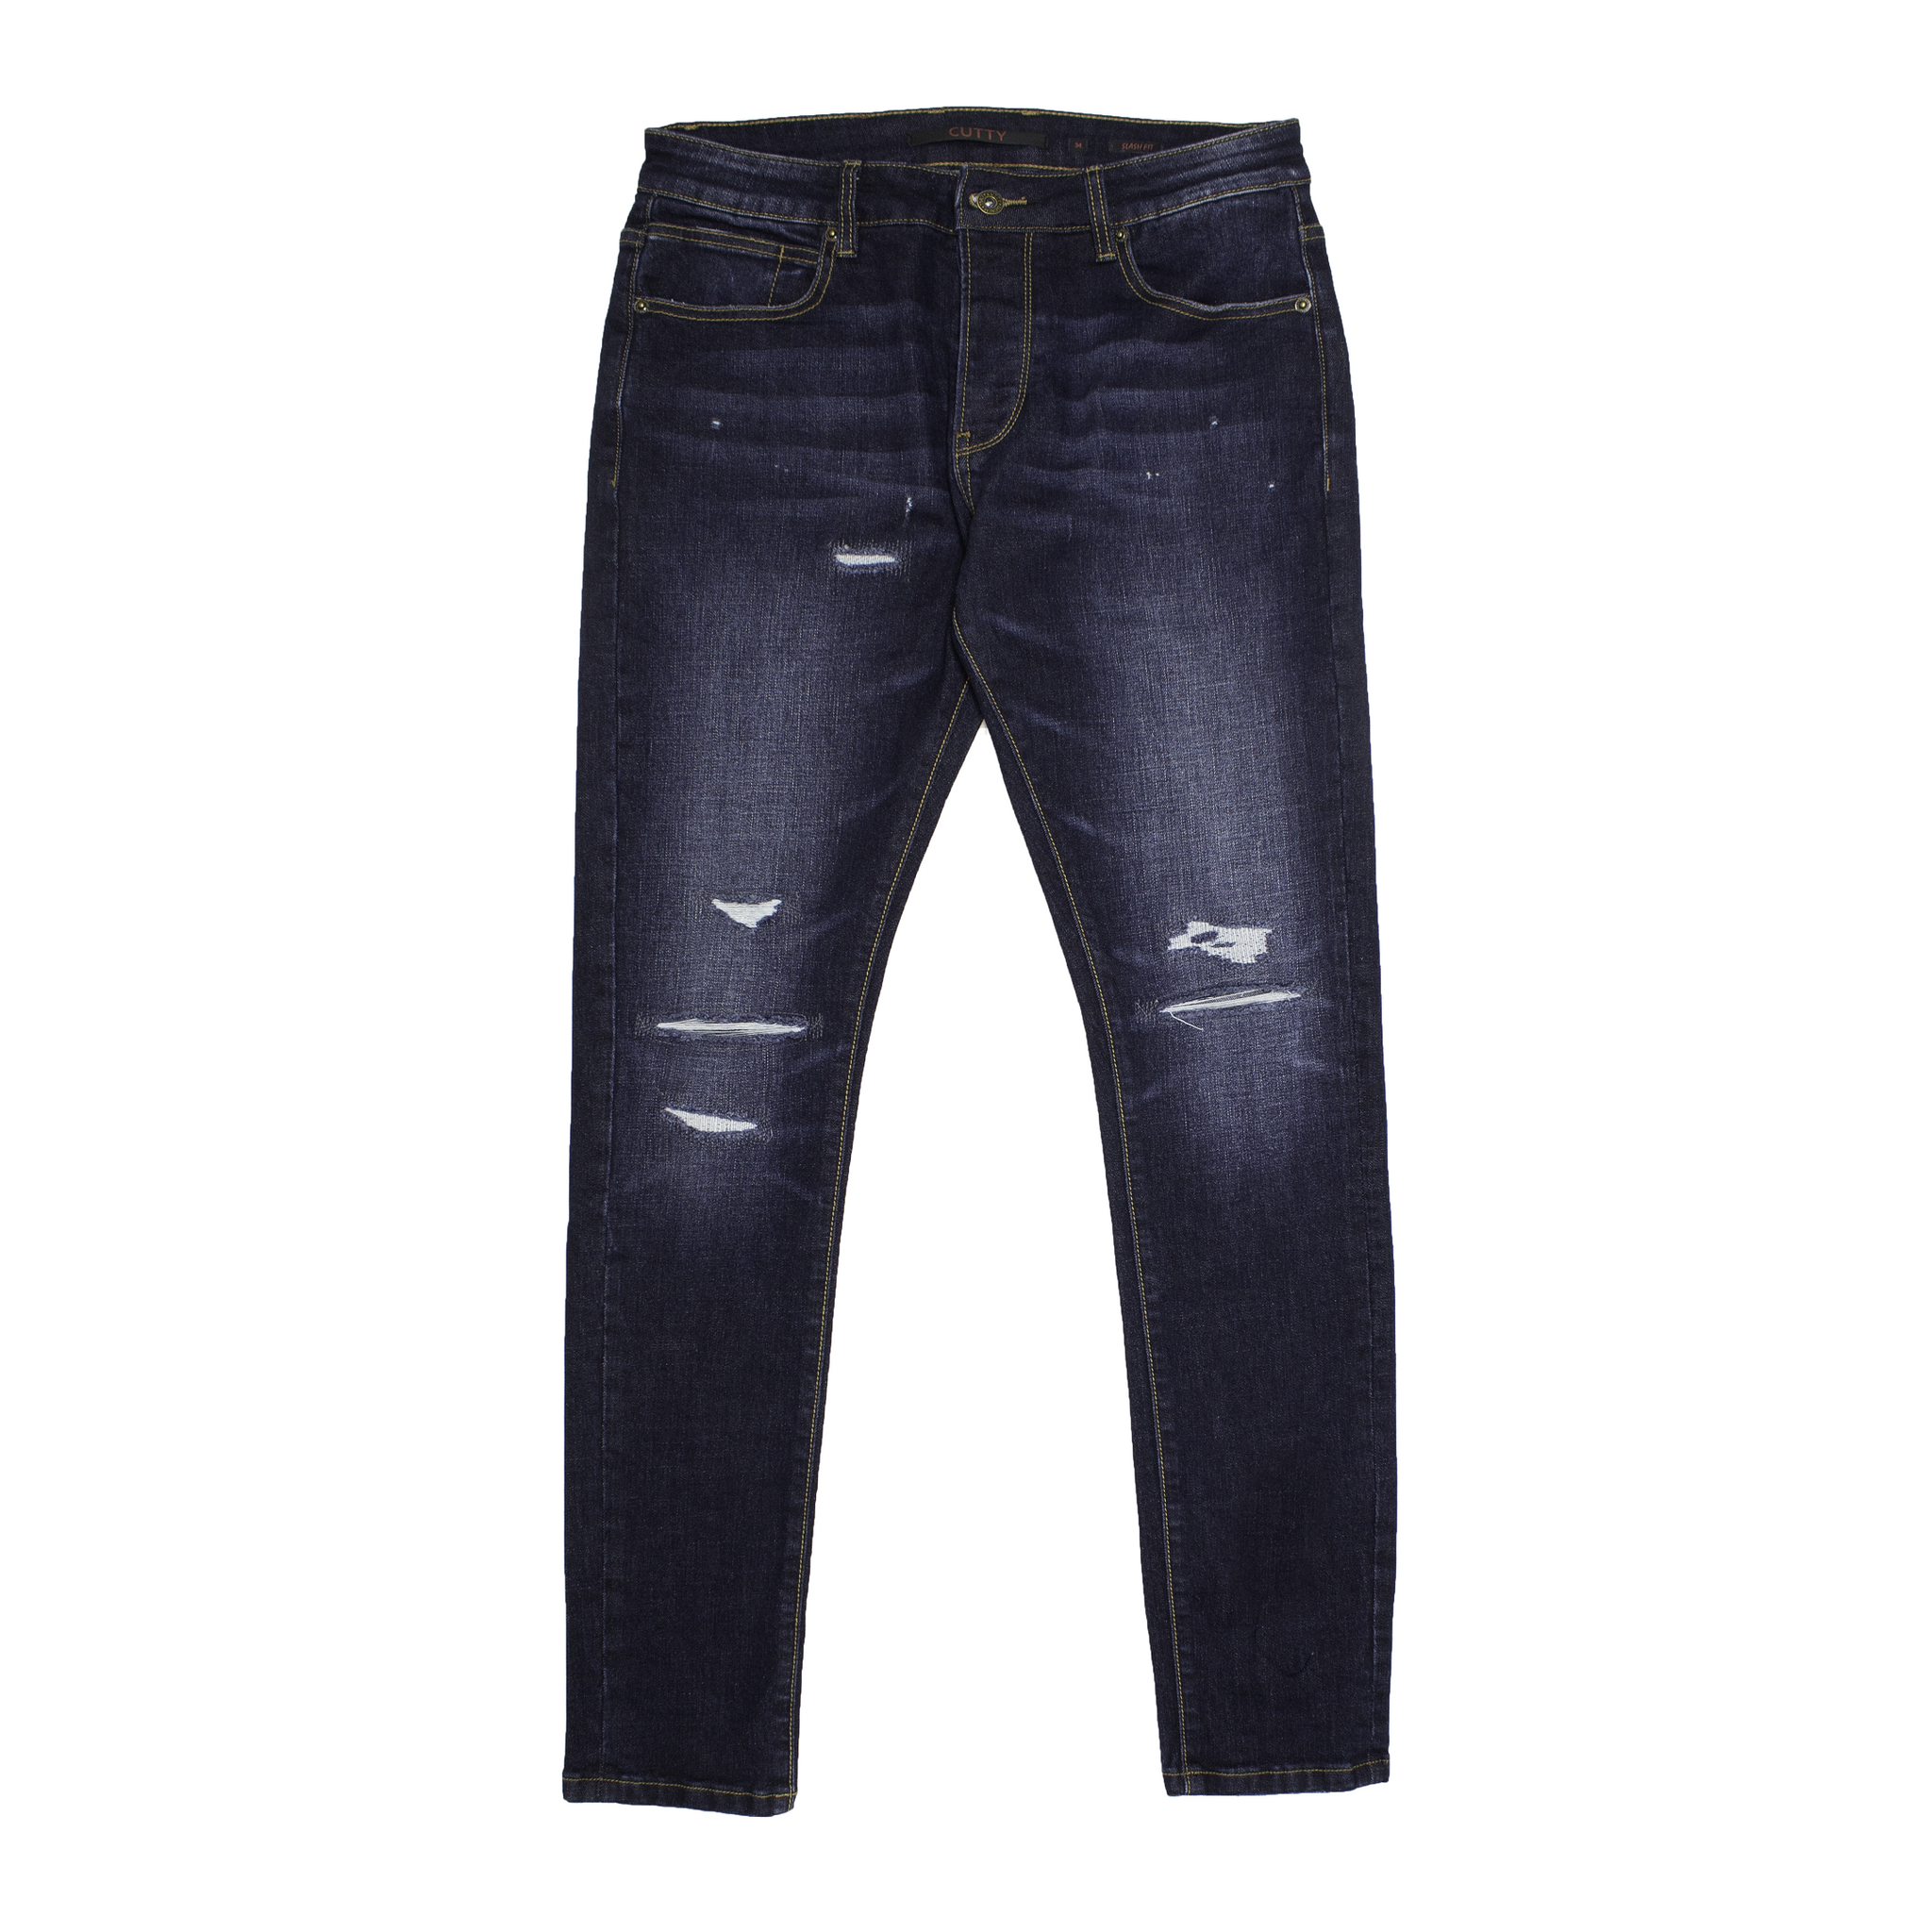 Cutty Denim Tower Jeans On Sale Now_Cutty Denim Moore Mens Jeans sold online By Just Denim_R100 Bucks Off Sale_Shop Now_Just Denim South Africa